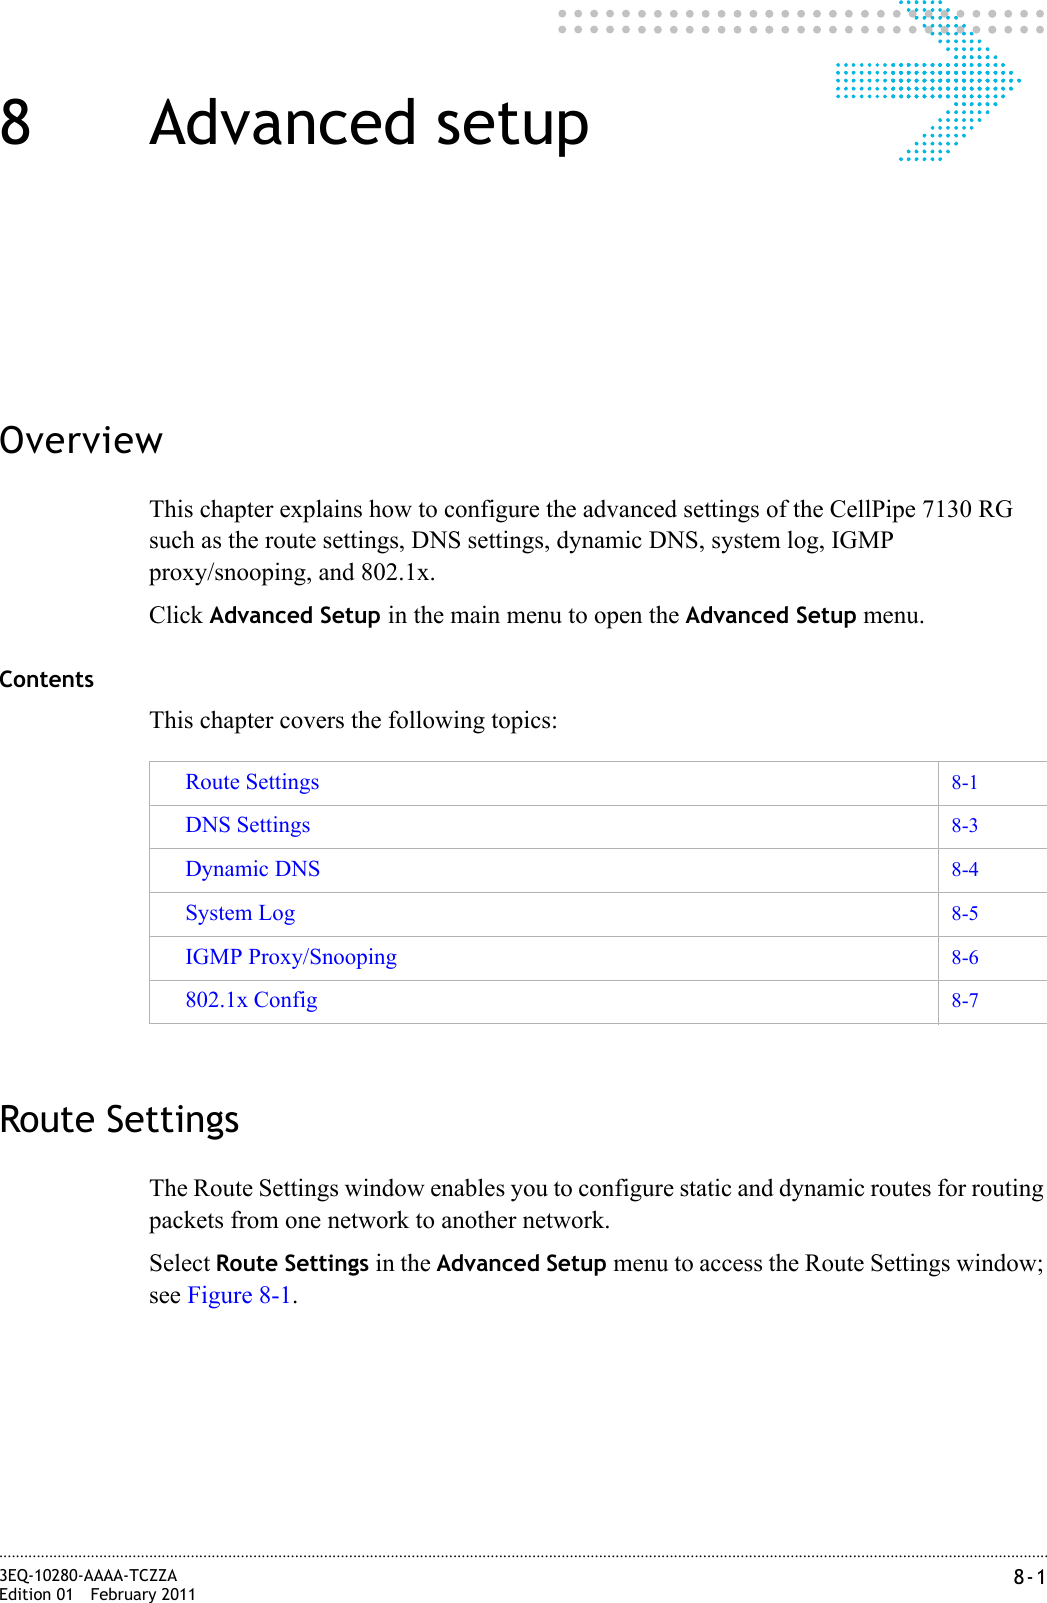 8-13EQ-10280-AAAA-TCZZAEdition 01 February 2011............................................................................................................................................................................................................................................................8 Advanced setupOverviewThis chapter explains how to configure the advanced settings of the CellPipe 7130 RG such as the route settings, DNS settings, dynamic DNS, system log, IGMP proxy/snooping, and 802.1x.Click Advanced Setup in the main menu to open the Advanced Setup menu.ContentsThis chapter covers the following topics:Route SettingsThe Route Settings window enables you to configure static and dynamic routes for routing packets from one network to another network.Select Route Settings in the Advanced Setup menu to access the Route Settings window; see Figure 8-1.Route Settings 8-1DNS Settings 8-3Dynamic DNS 8-4System Log 8-5IGMP Proxy/Snooping 8-6802.1x Config 8-7